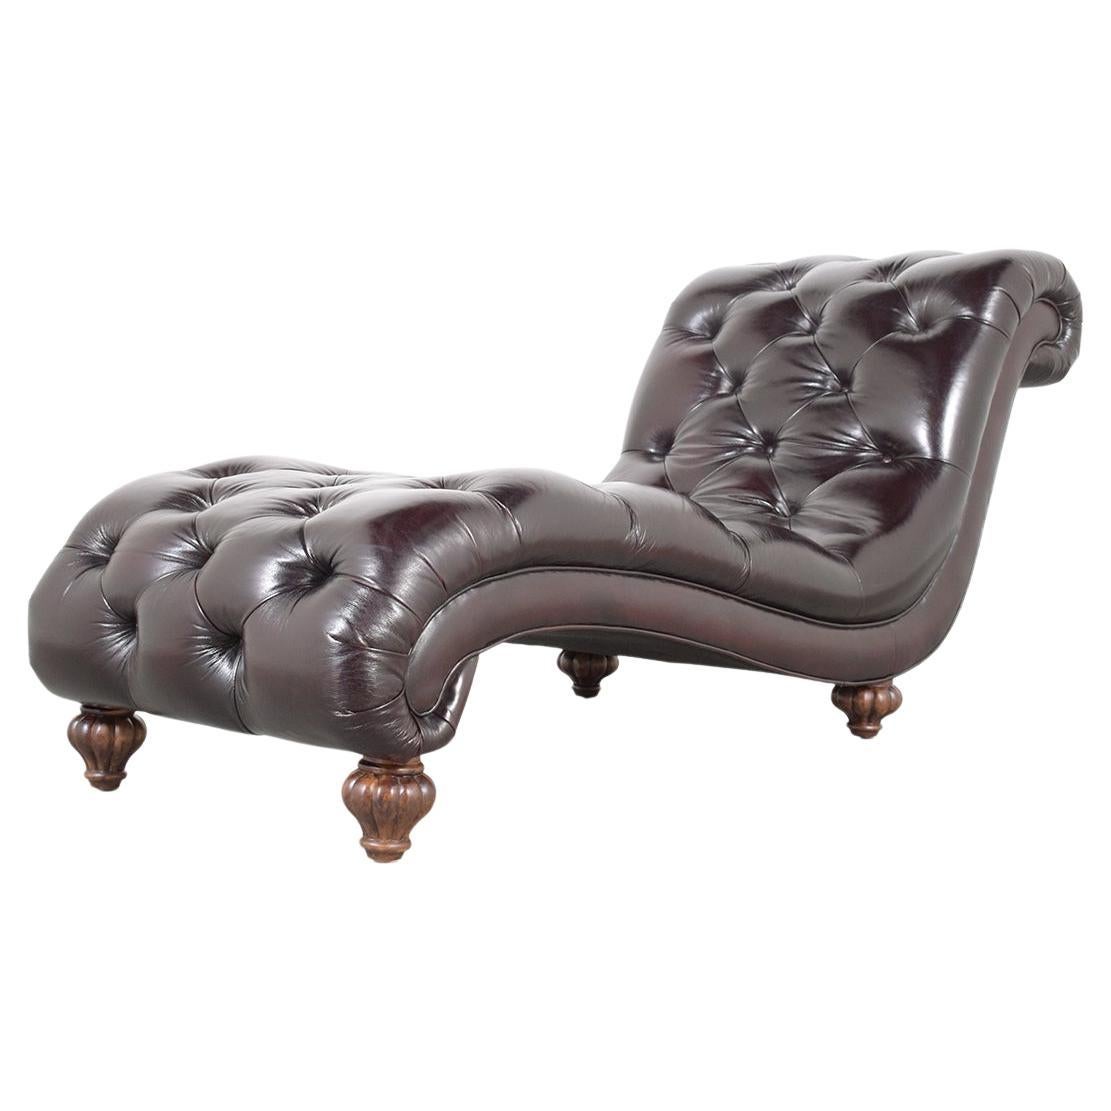 Classic Elegance: 1980s Chesterfield Chaise Lounge in Dual-Tone Leather For Sale